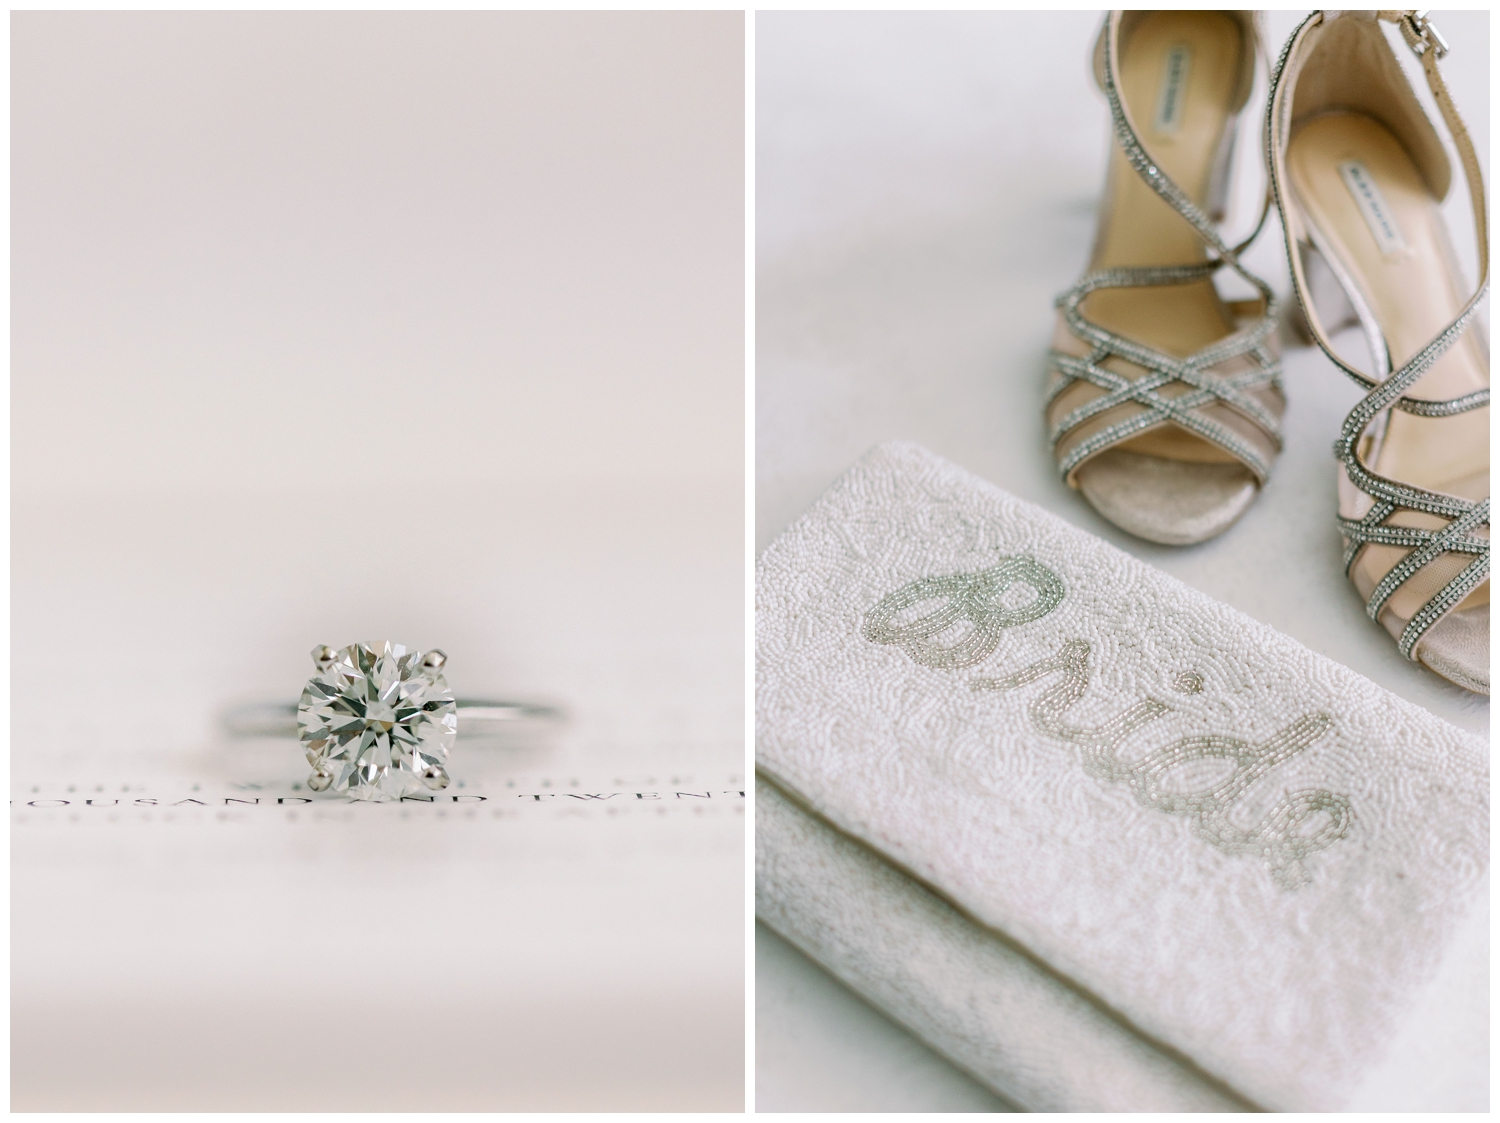 bride details of silver wedding ring, shoes and purse